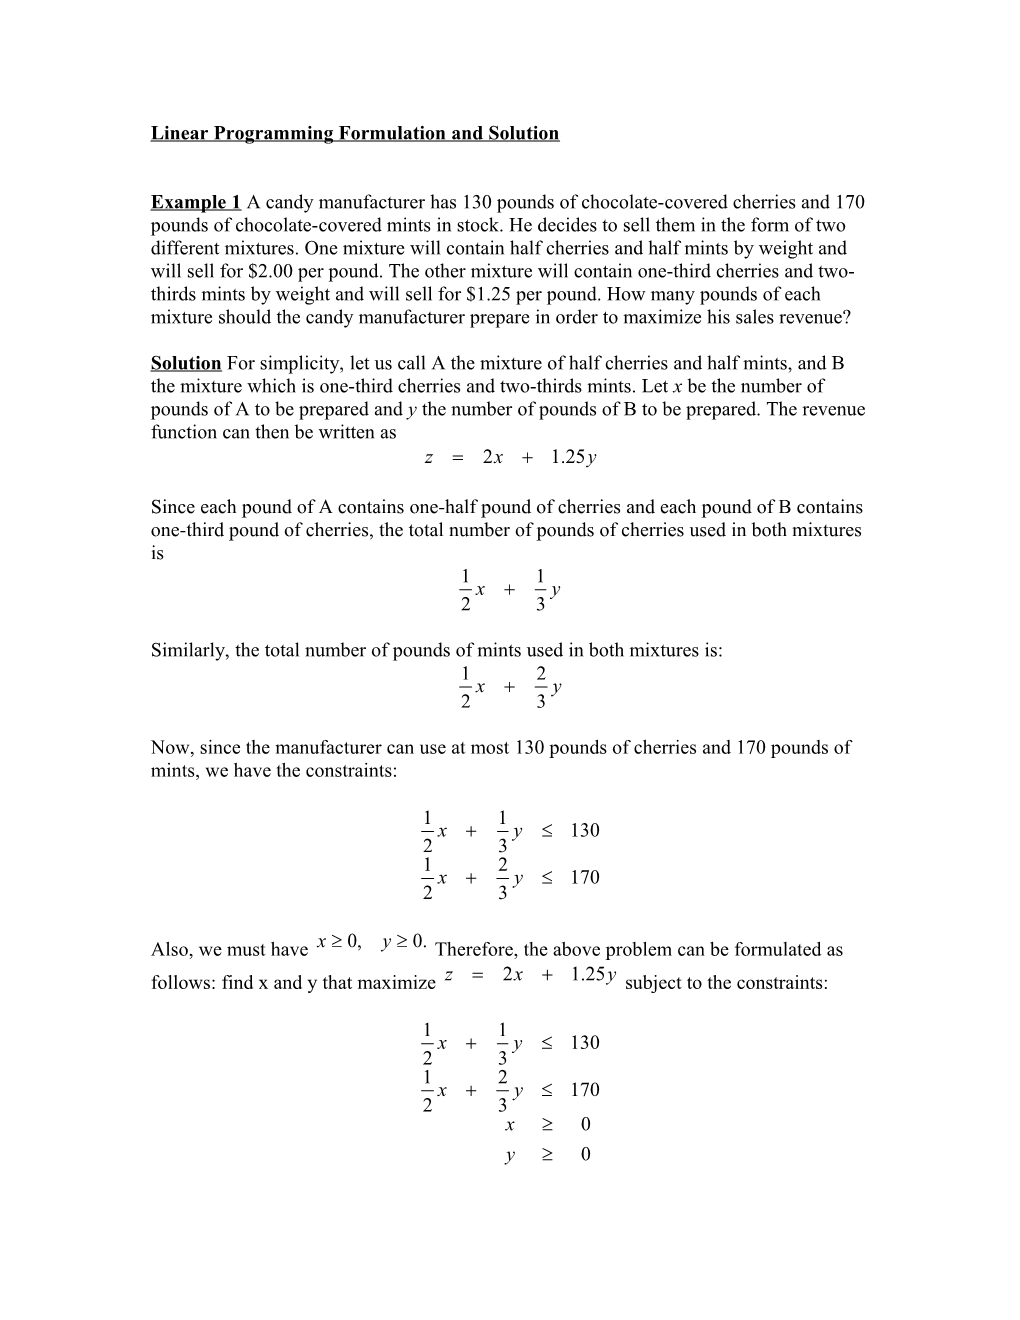 Linear Programming Formulation And Solution